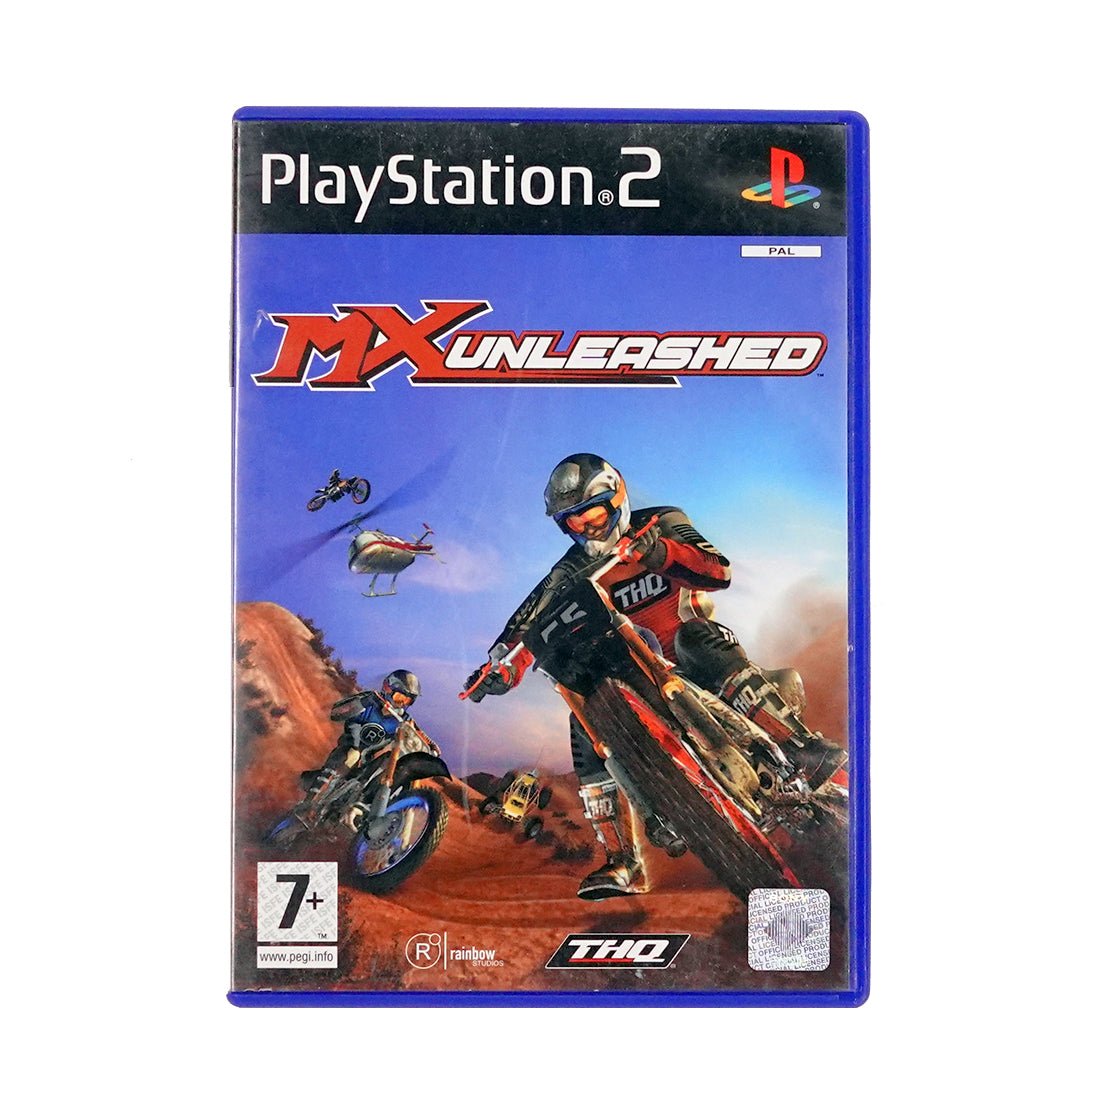 (Pre-Owned) Mx Unleashed - PlayStation 2 - Store 974 | ستور ٩٧٤